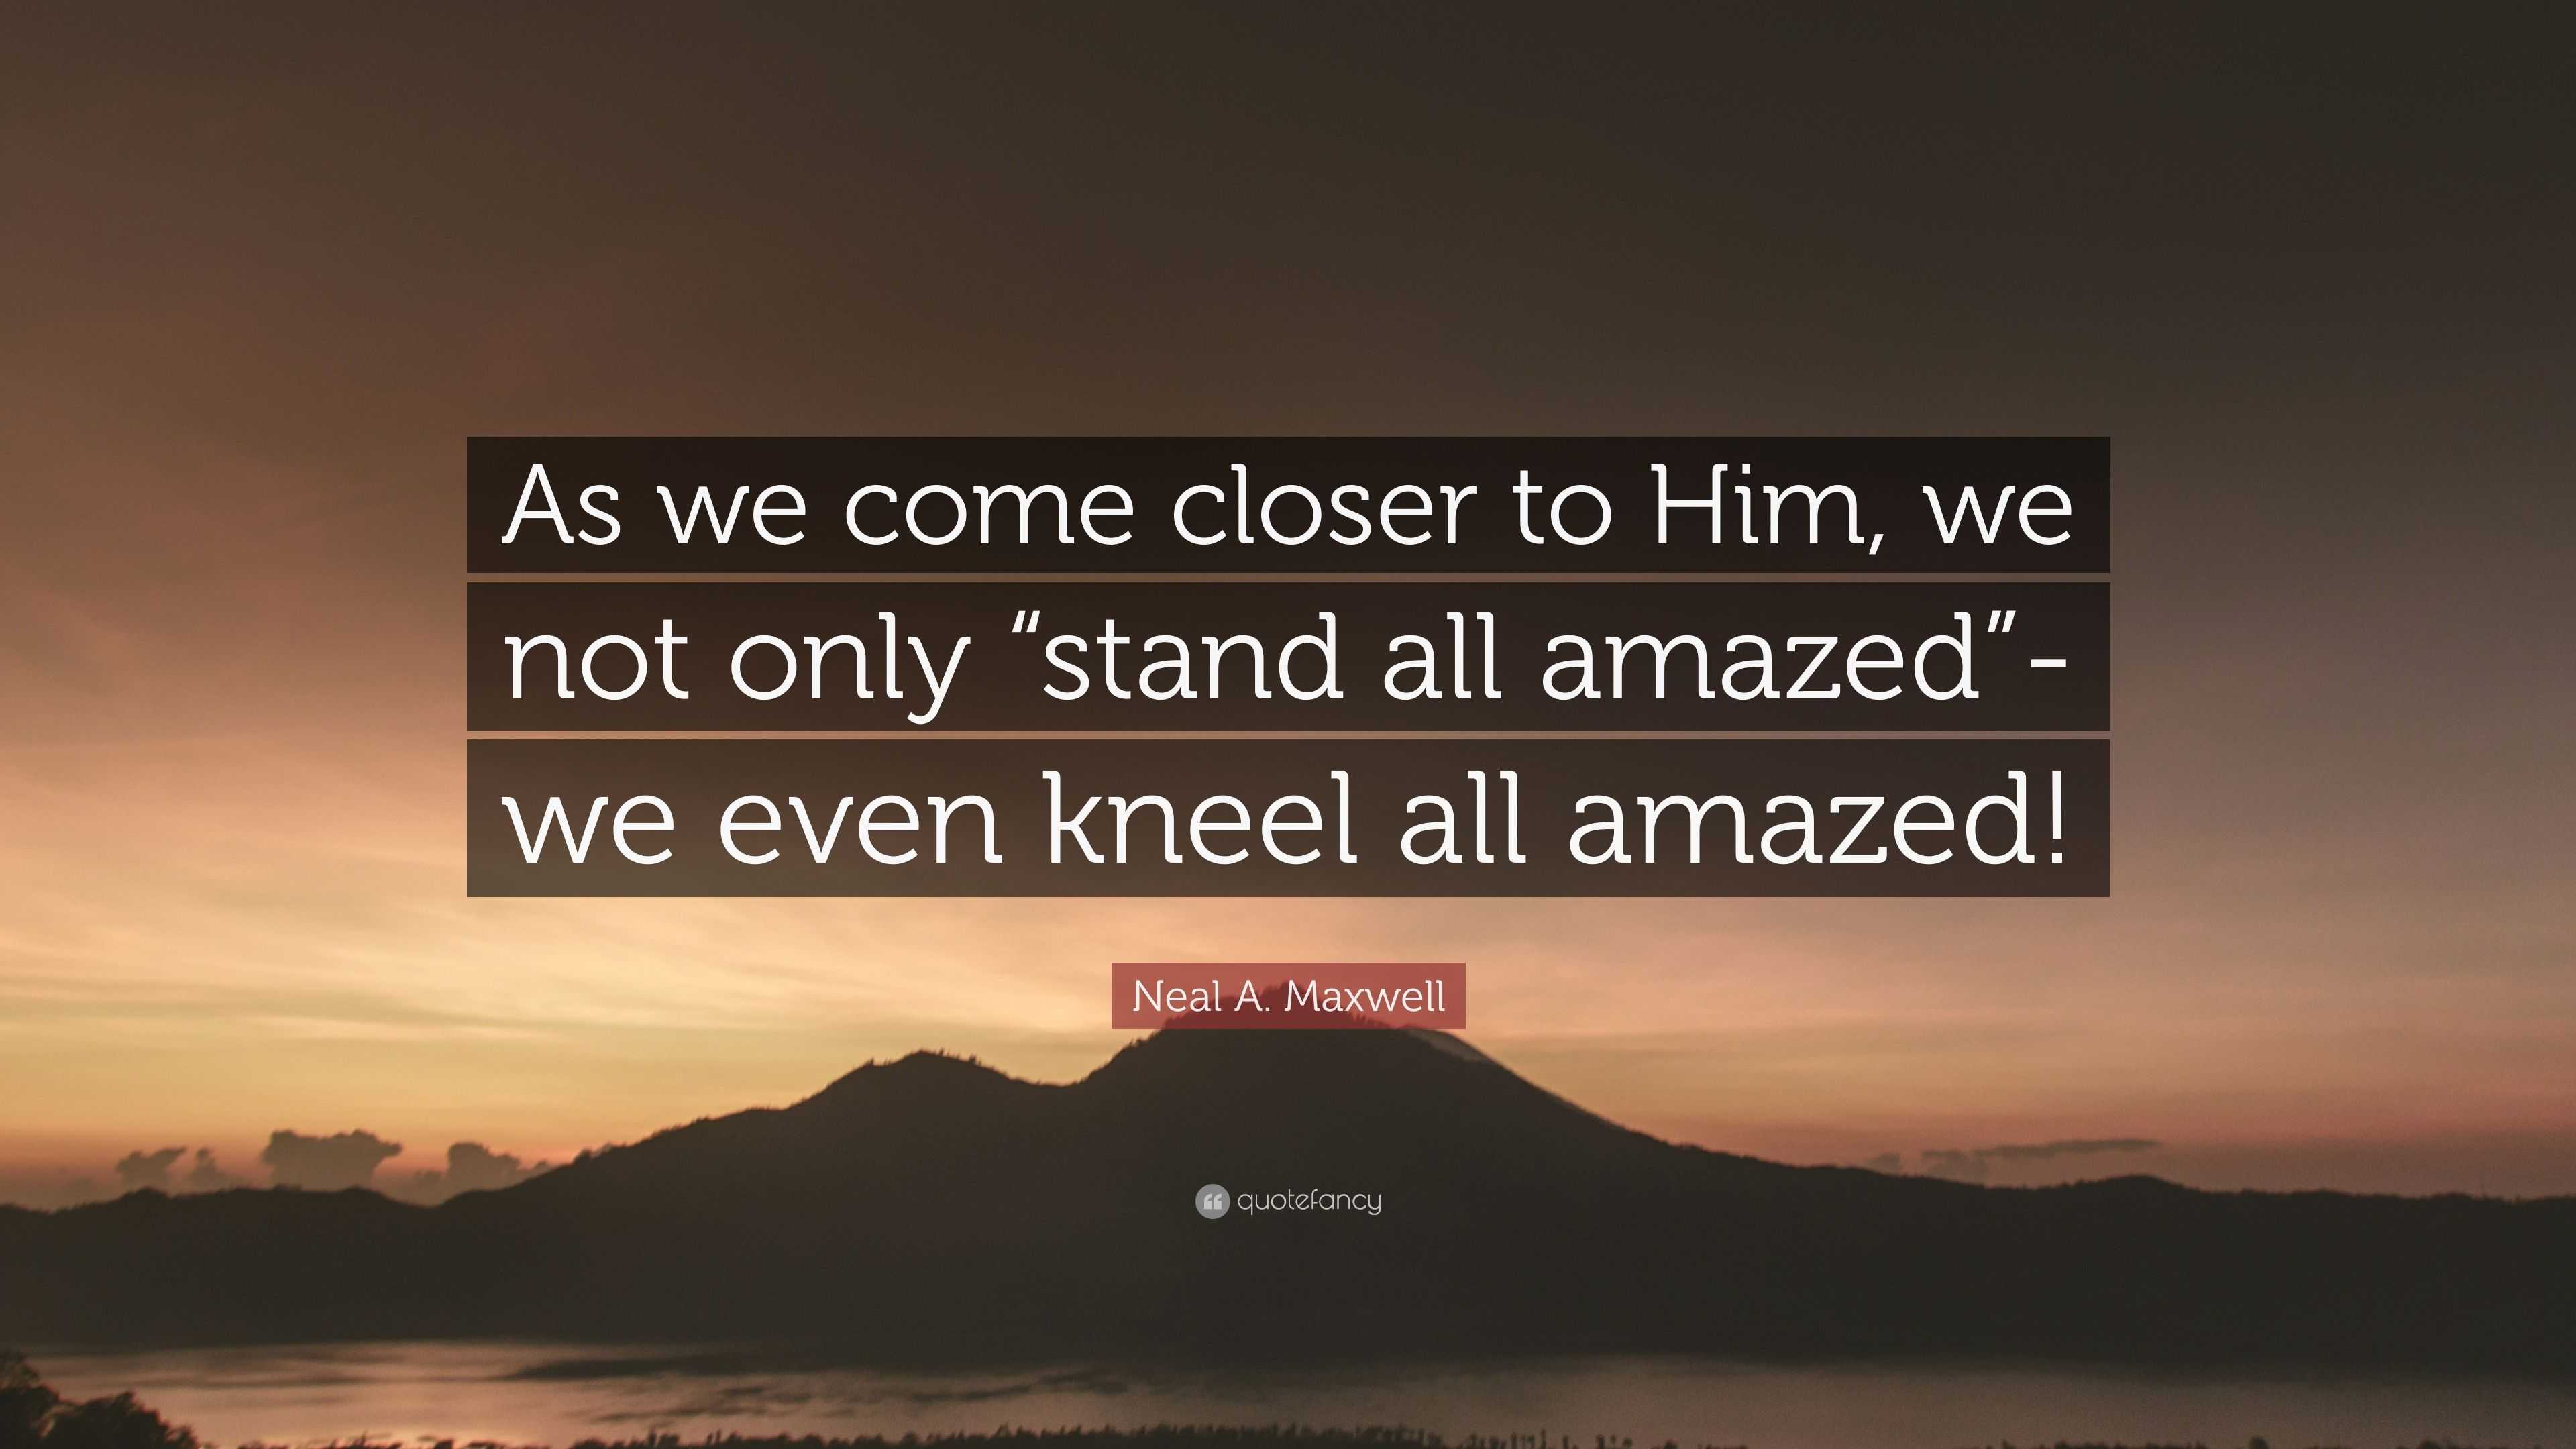 Neal A. Maxwell Quote: “As we come closer to Him, we not only “stand ...